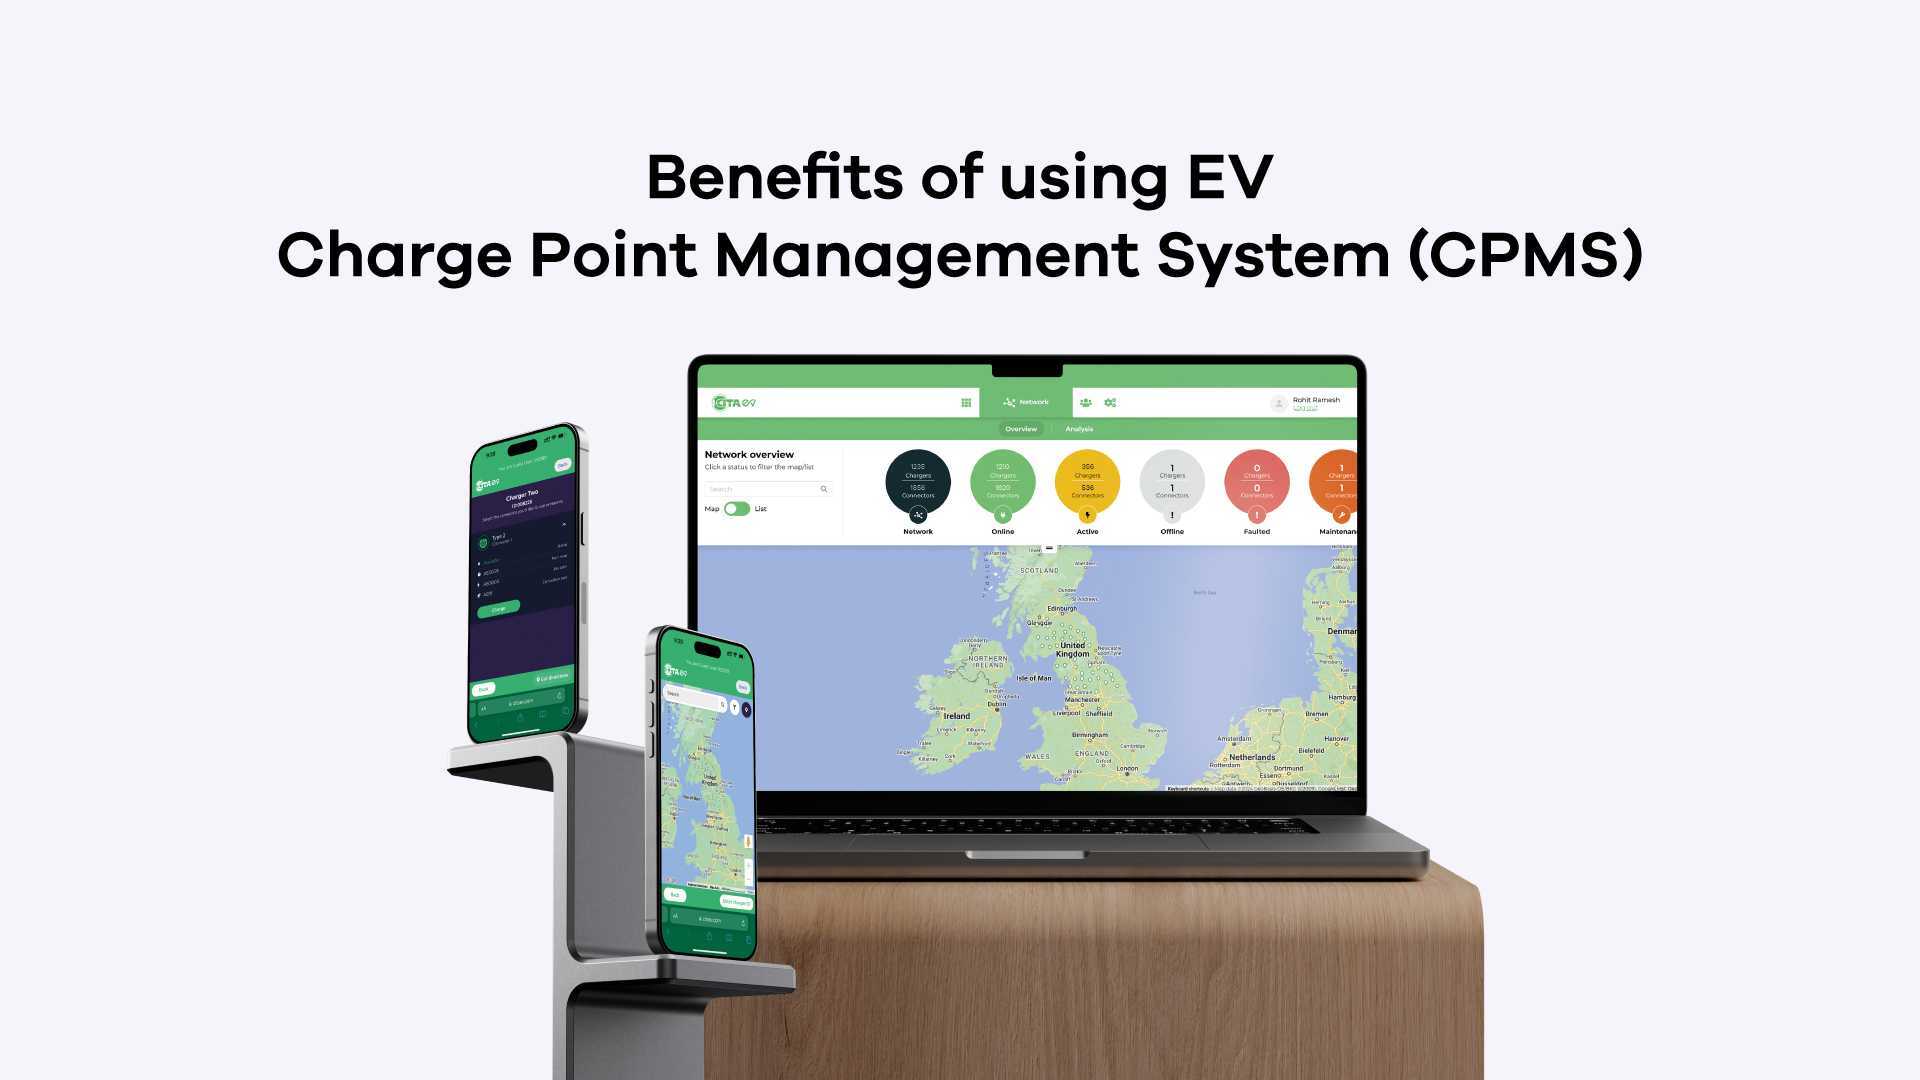 Benefits of using CITA’s EV Charge Point Management System